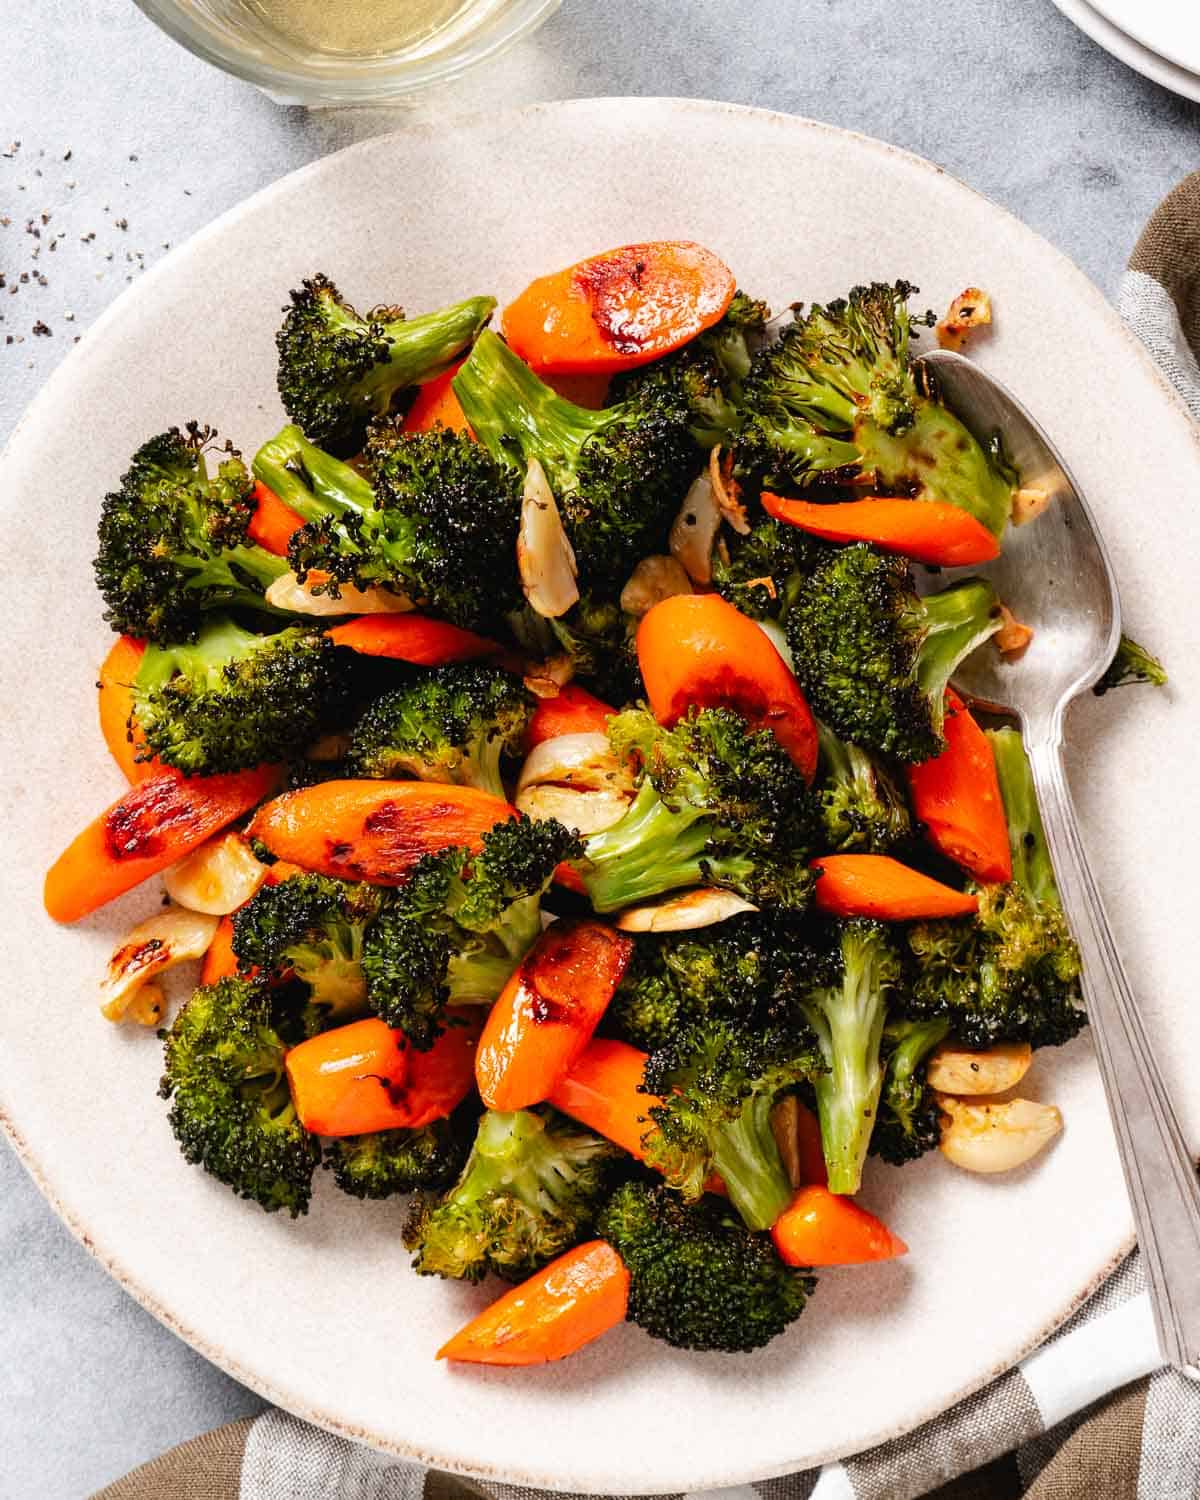 Roasted broccoli and carrots on a plate.